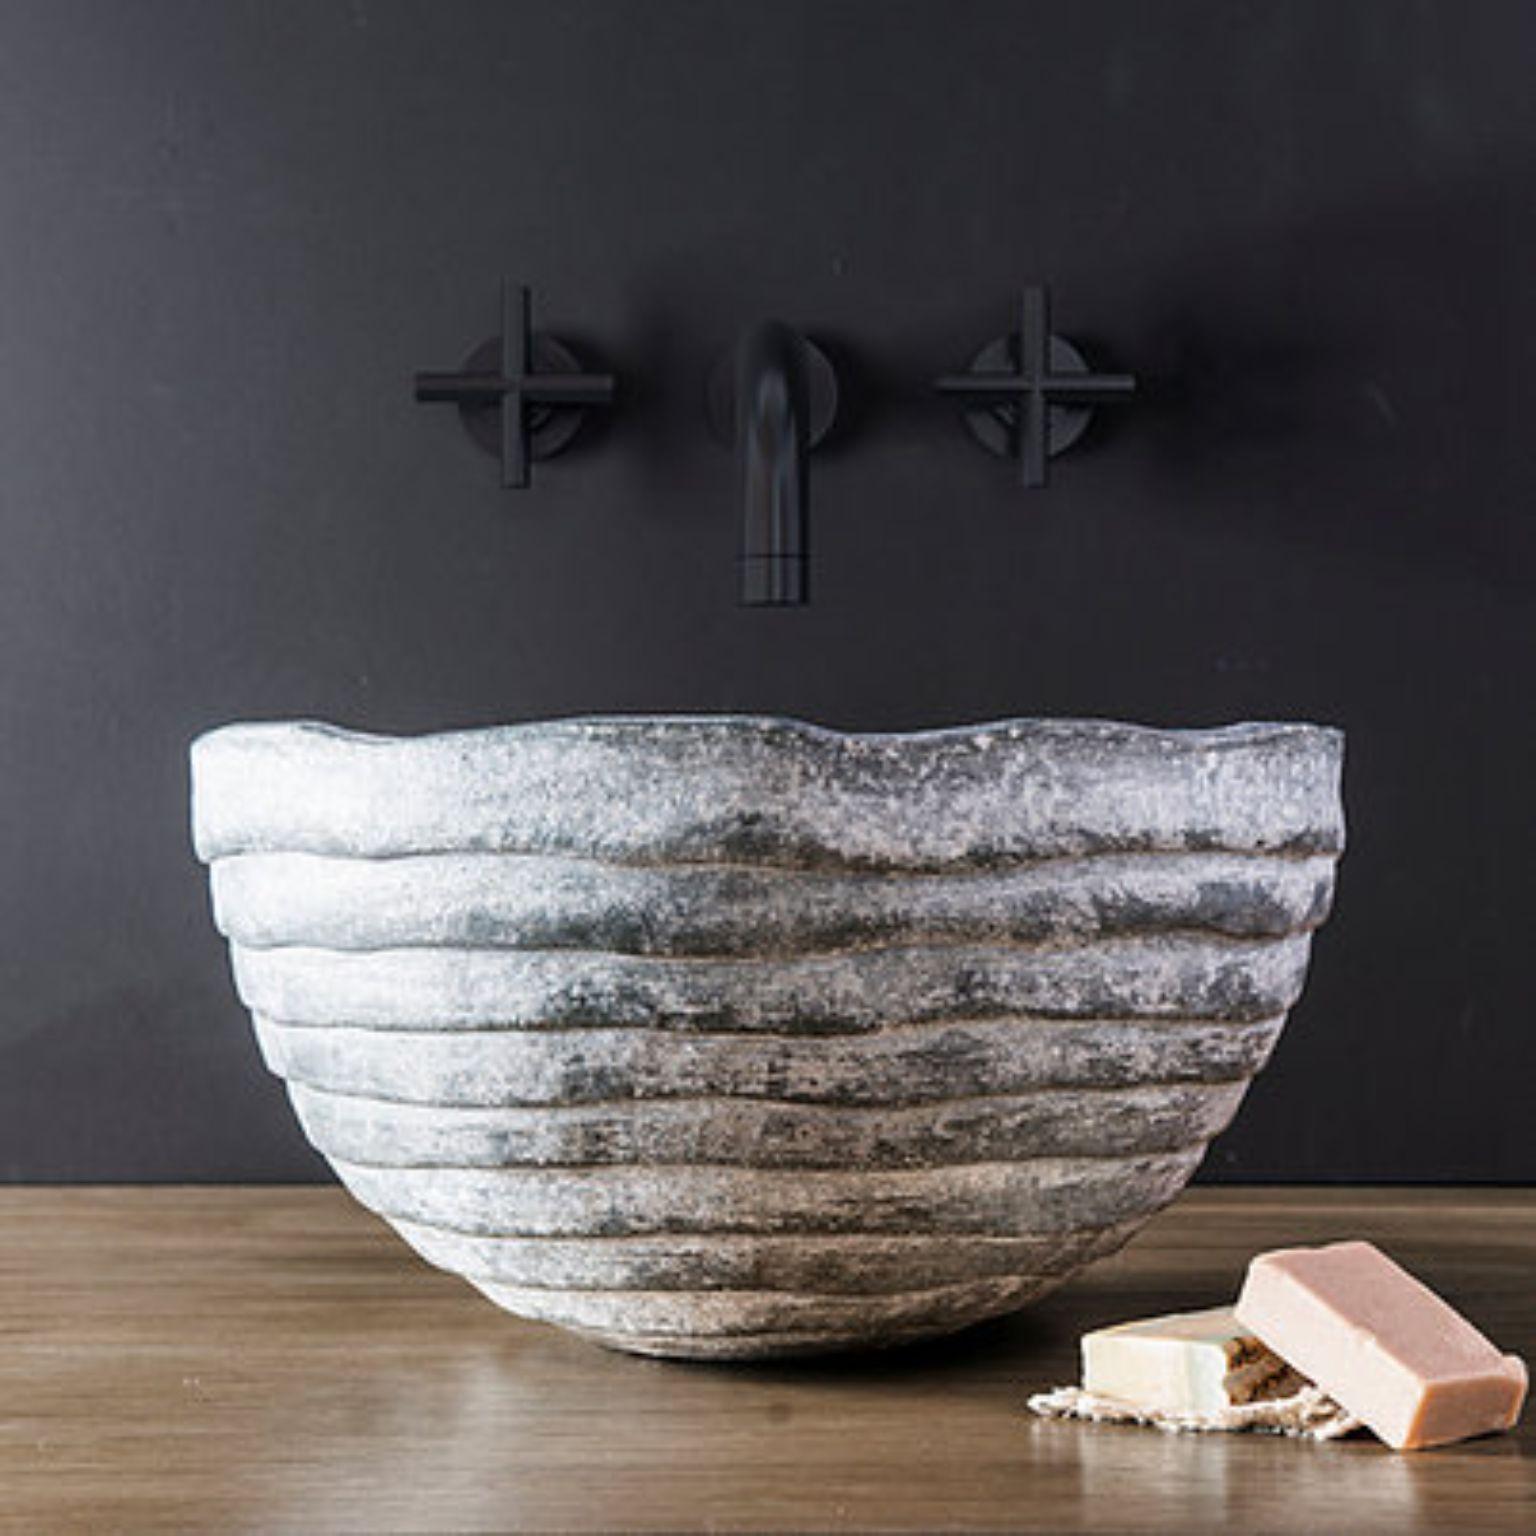 Clay wash basin by FAINA
Design: Victoriya Yakusha
Material: Clay
Dimensions: 43 x 21 cm

In search of new-old design messages, Victoria Yakusha conducted a study of the daily traditions of our ancestors. The times of Trypillia and the Scythian